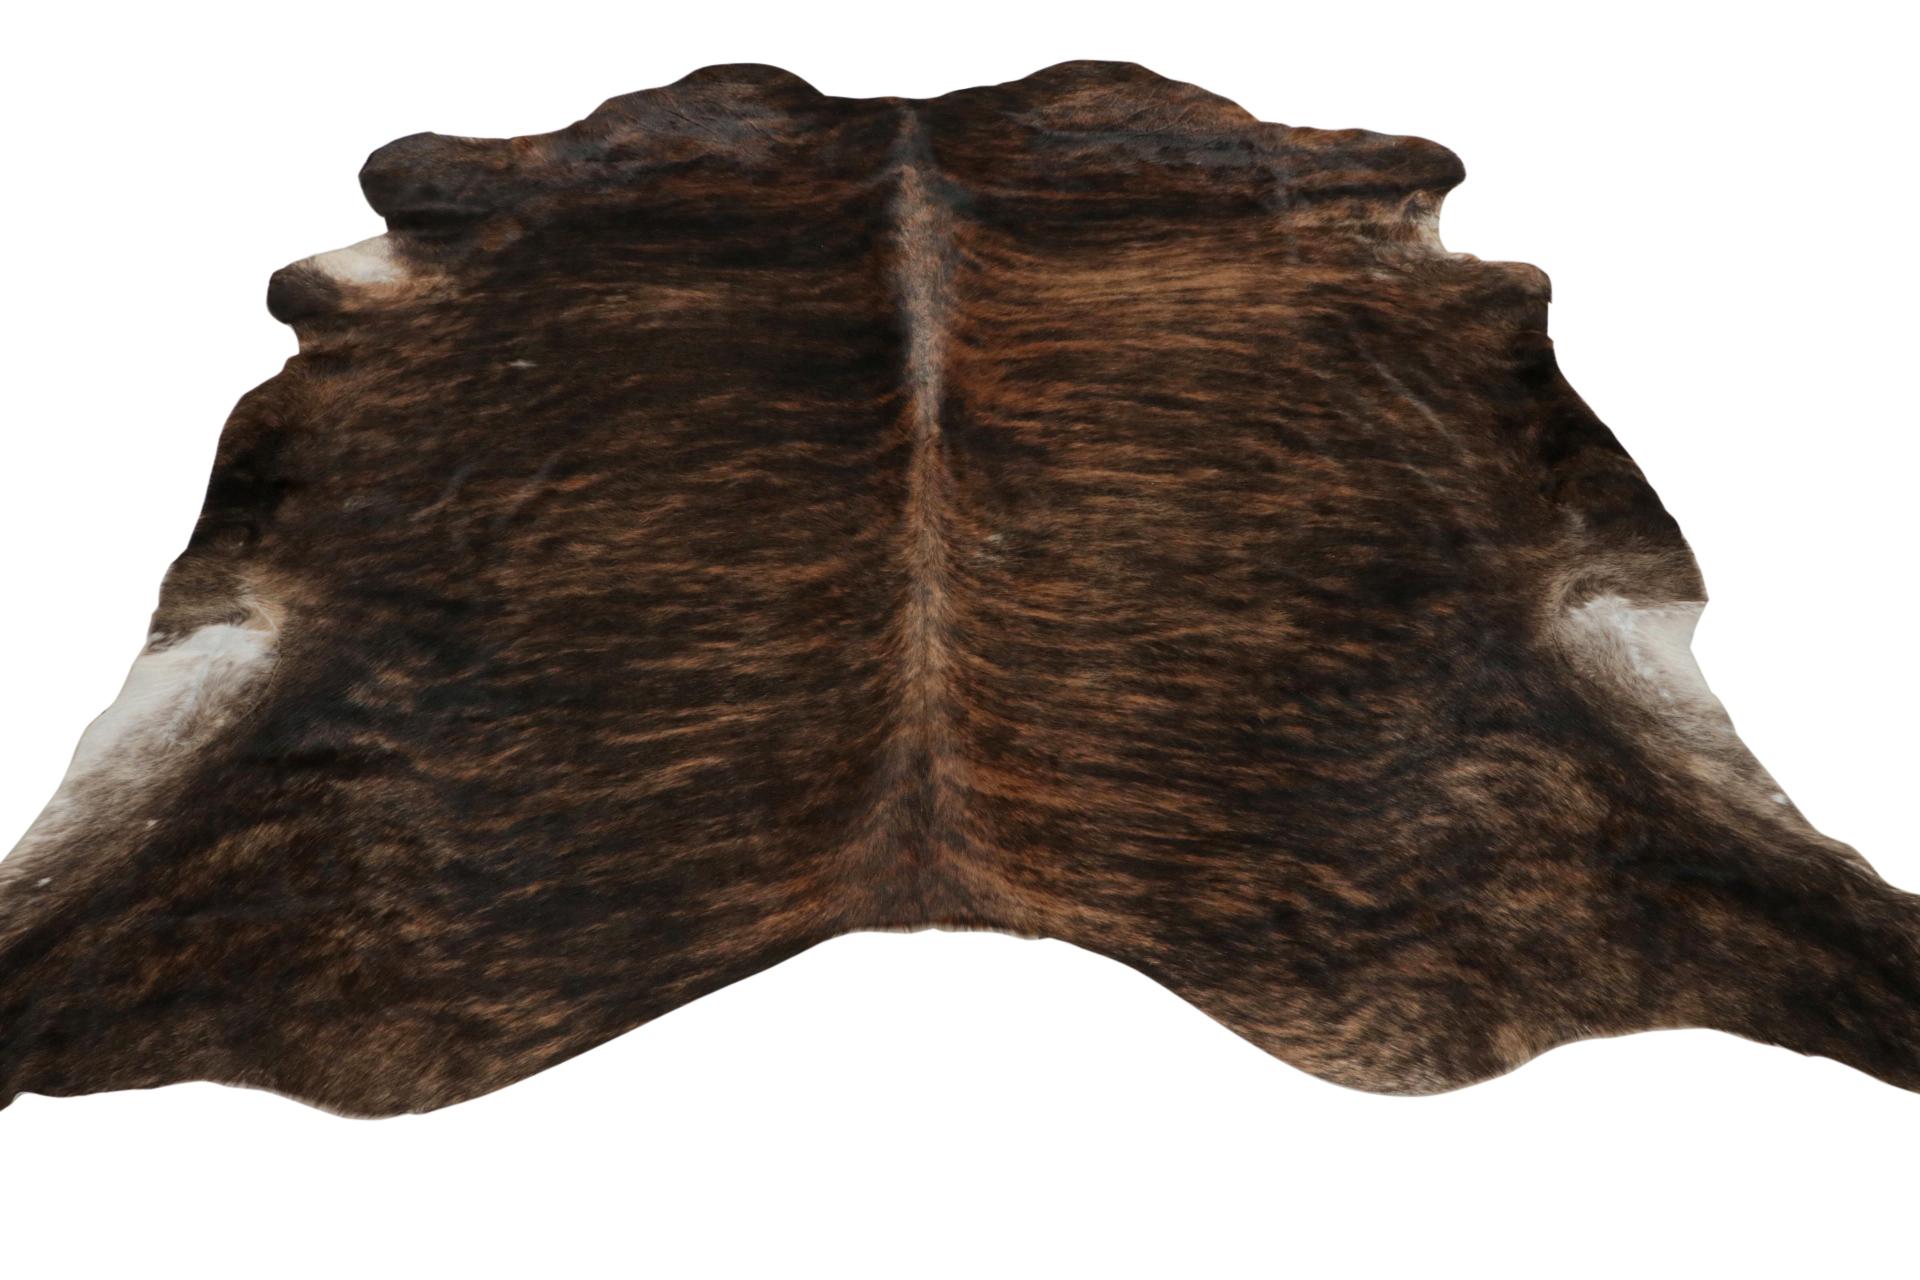 A 7x8 from Rug & Kilim’s line of handmade cowhide rugs. Enjoying a silky, lustrous sheen complementing rich beige-brown with black tones. A comfortable, textural choice, particularly well suited to country homes and rustic interiors.